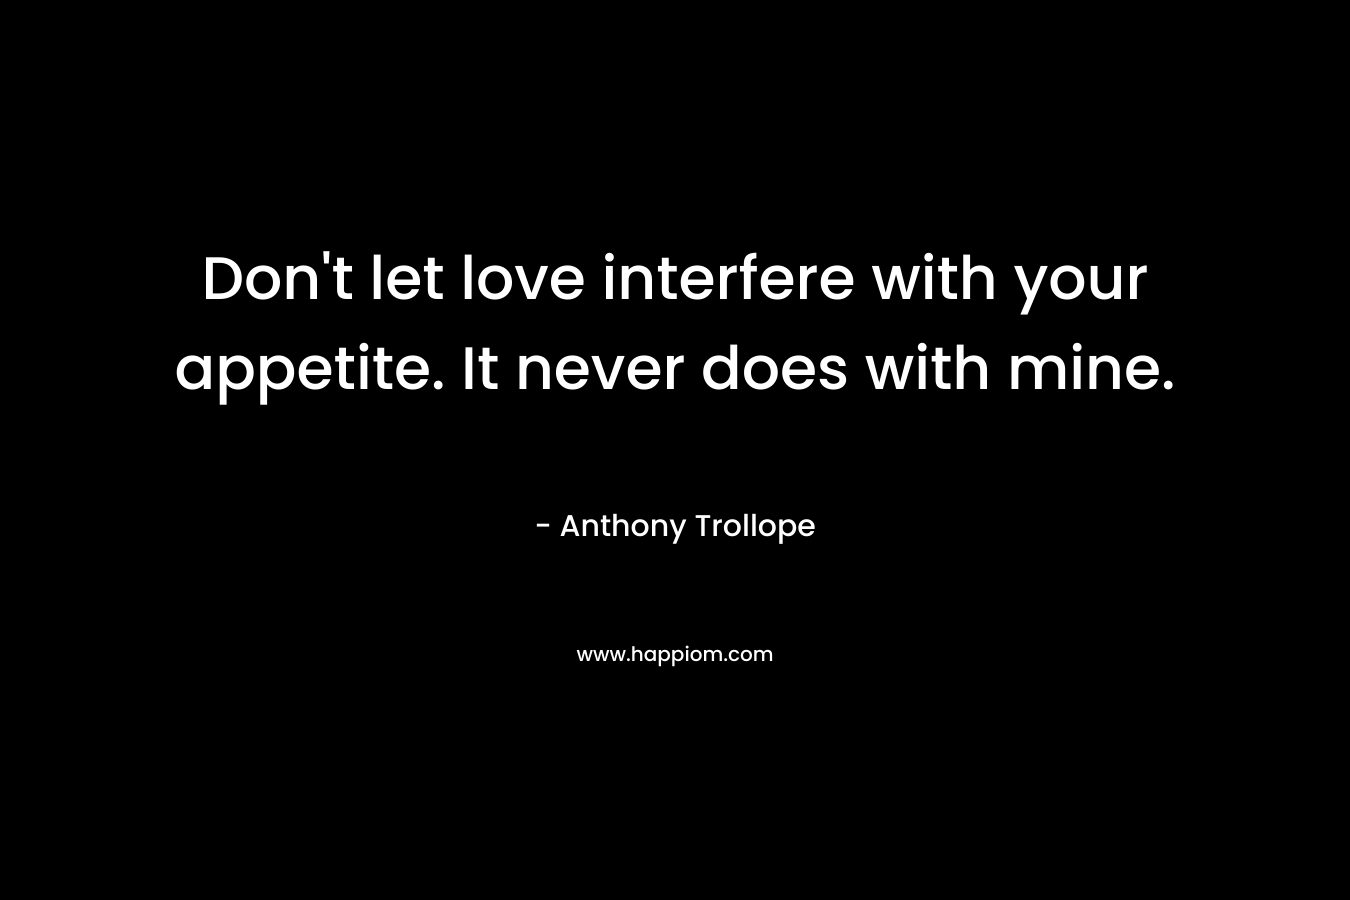 Don’t let love interfere with your appetite. It never does with mine. – Anthony Trollope